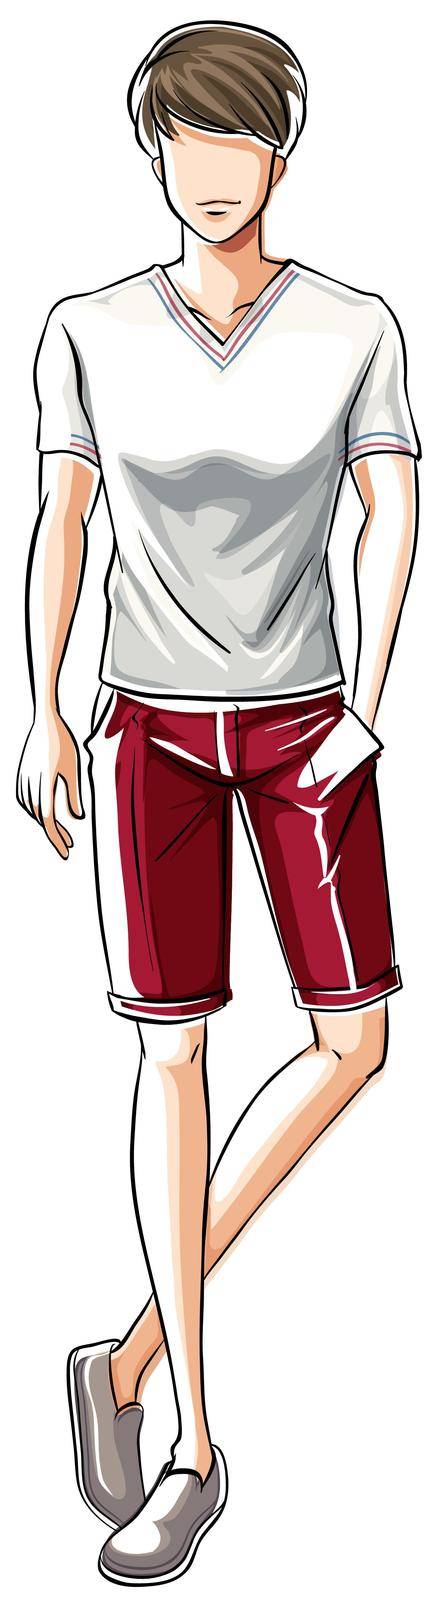 Sketch of a male in white t-shirt and red shorts